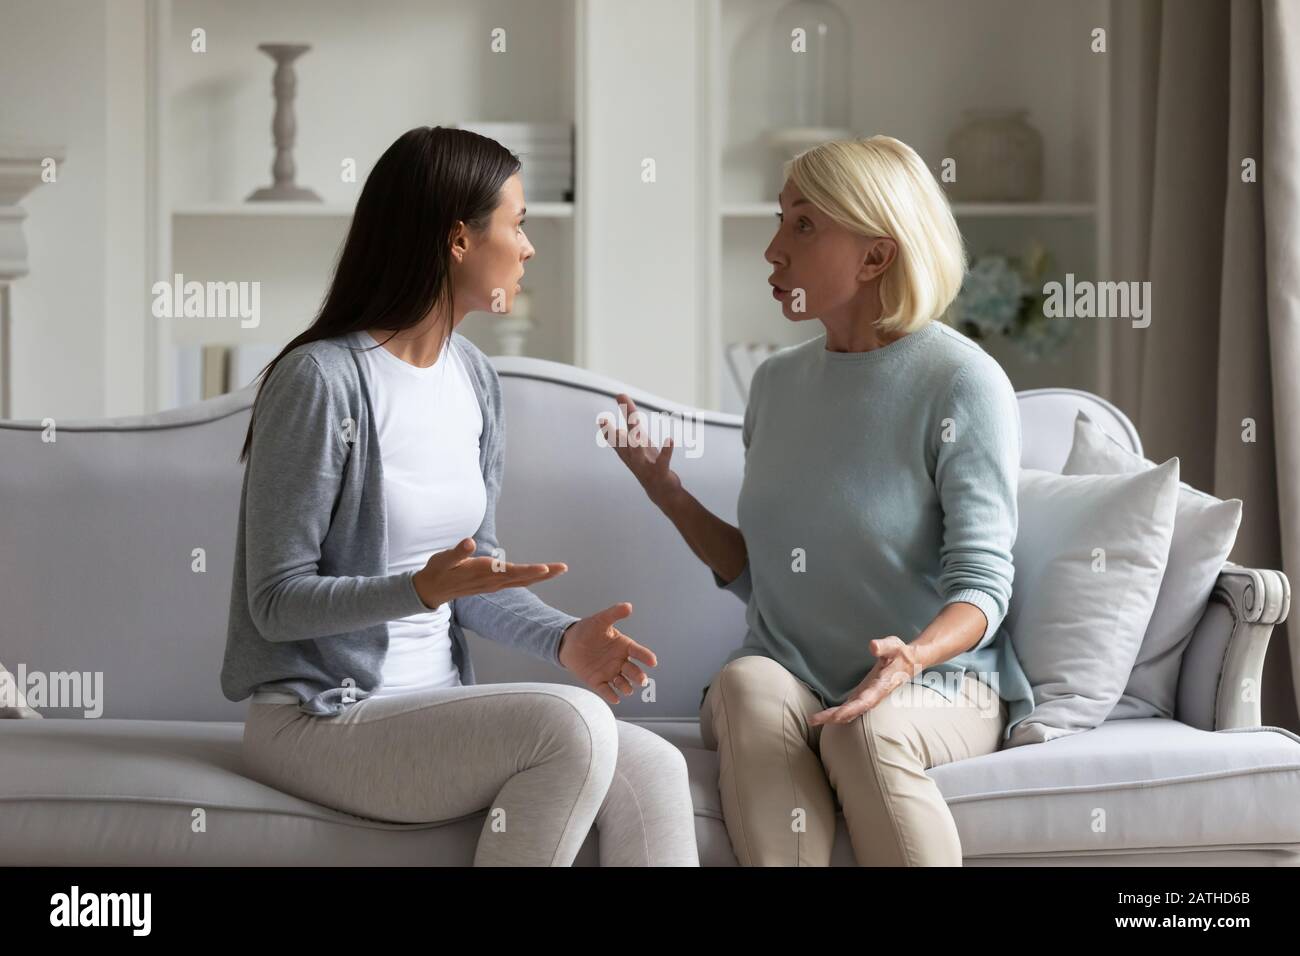 Angry grownup daughter and middle-aged mom dispute at home Stock Photo